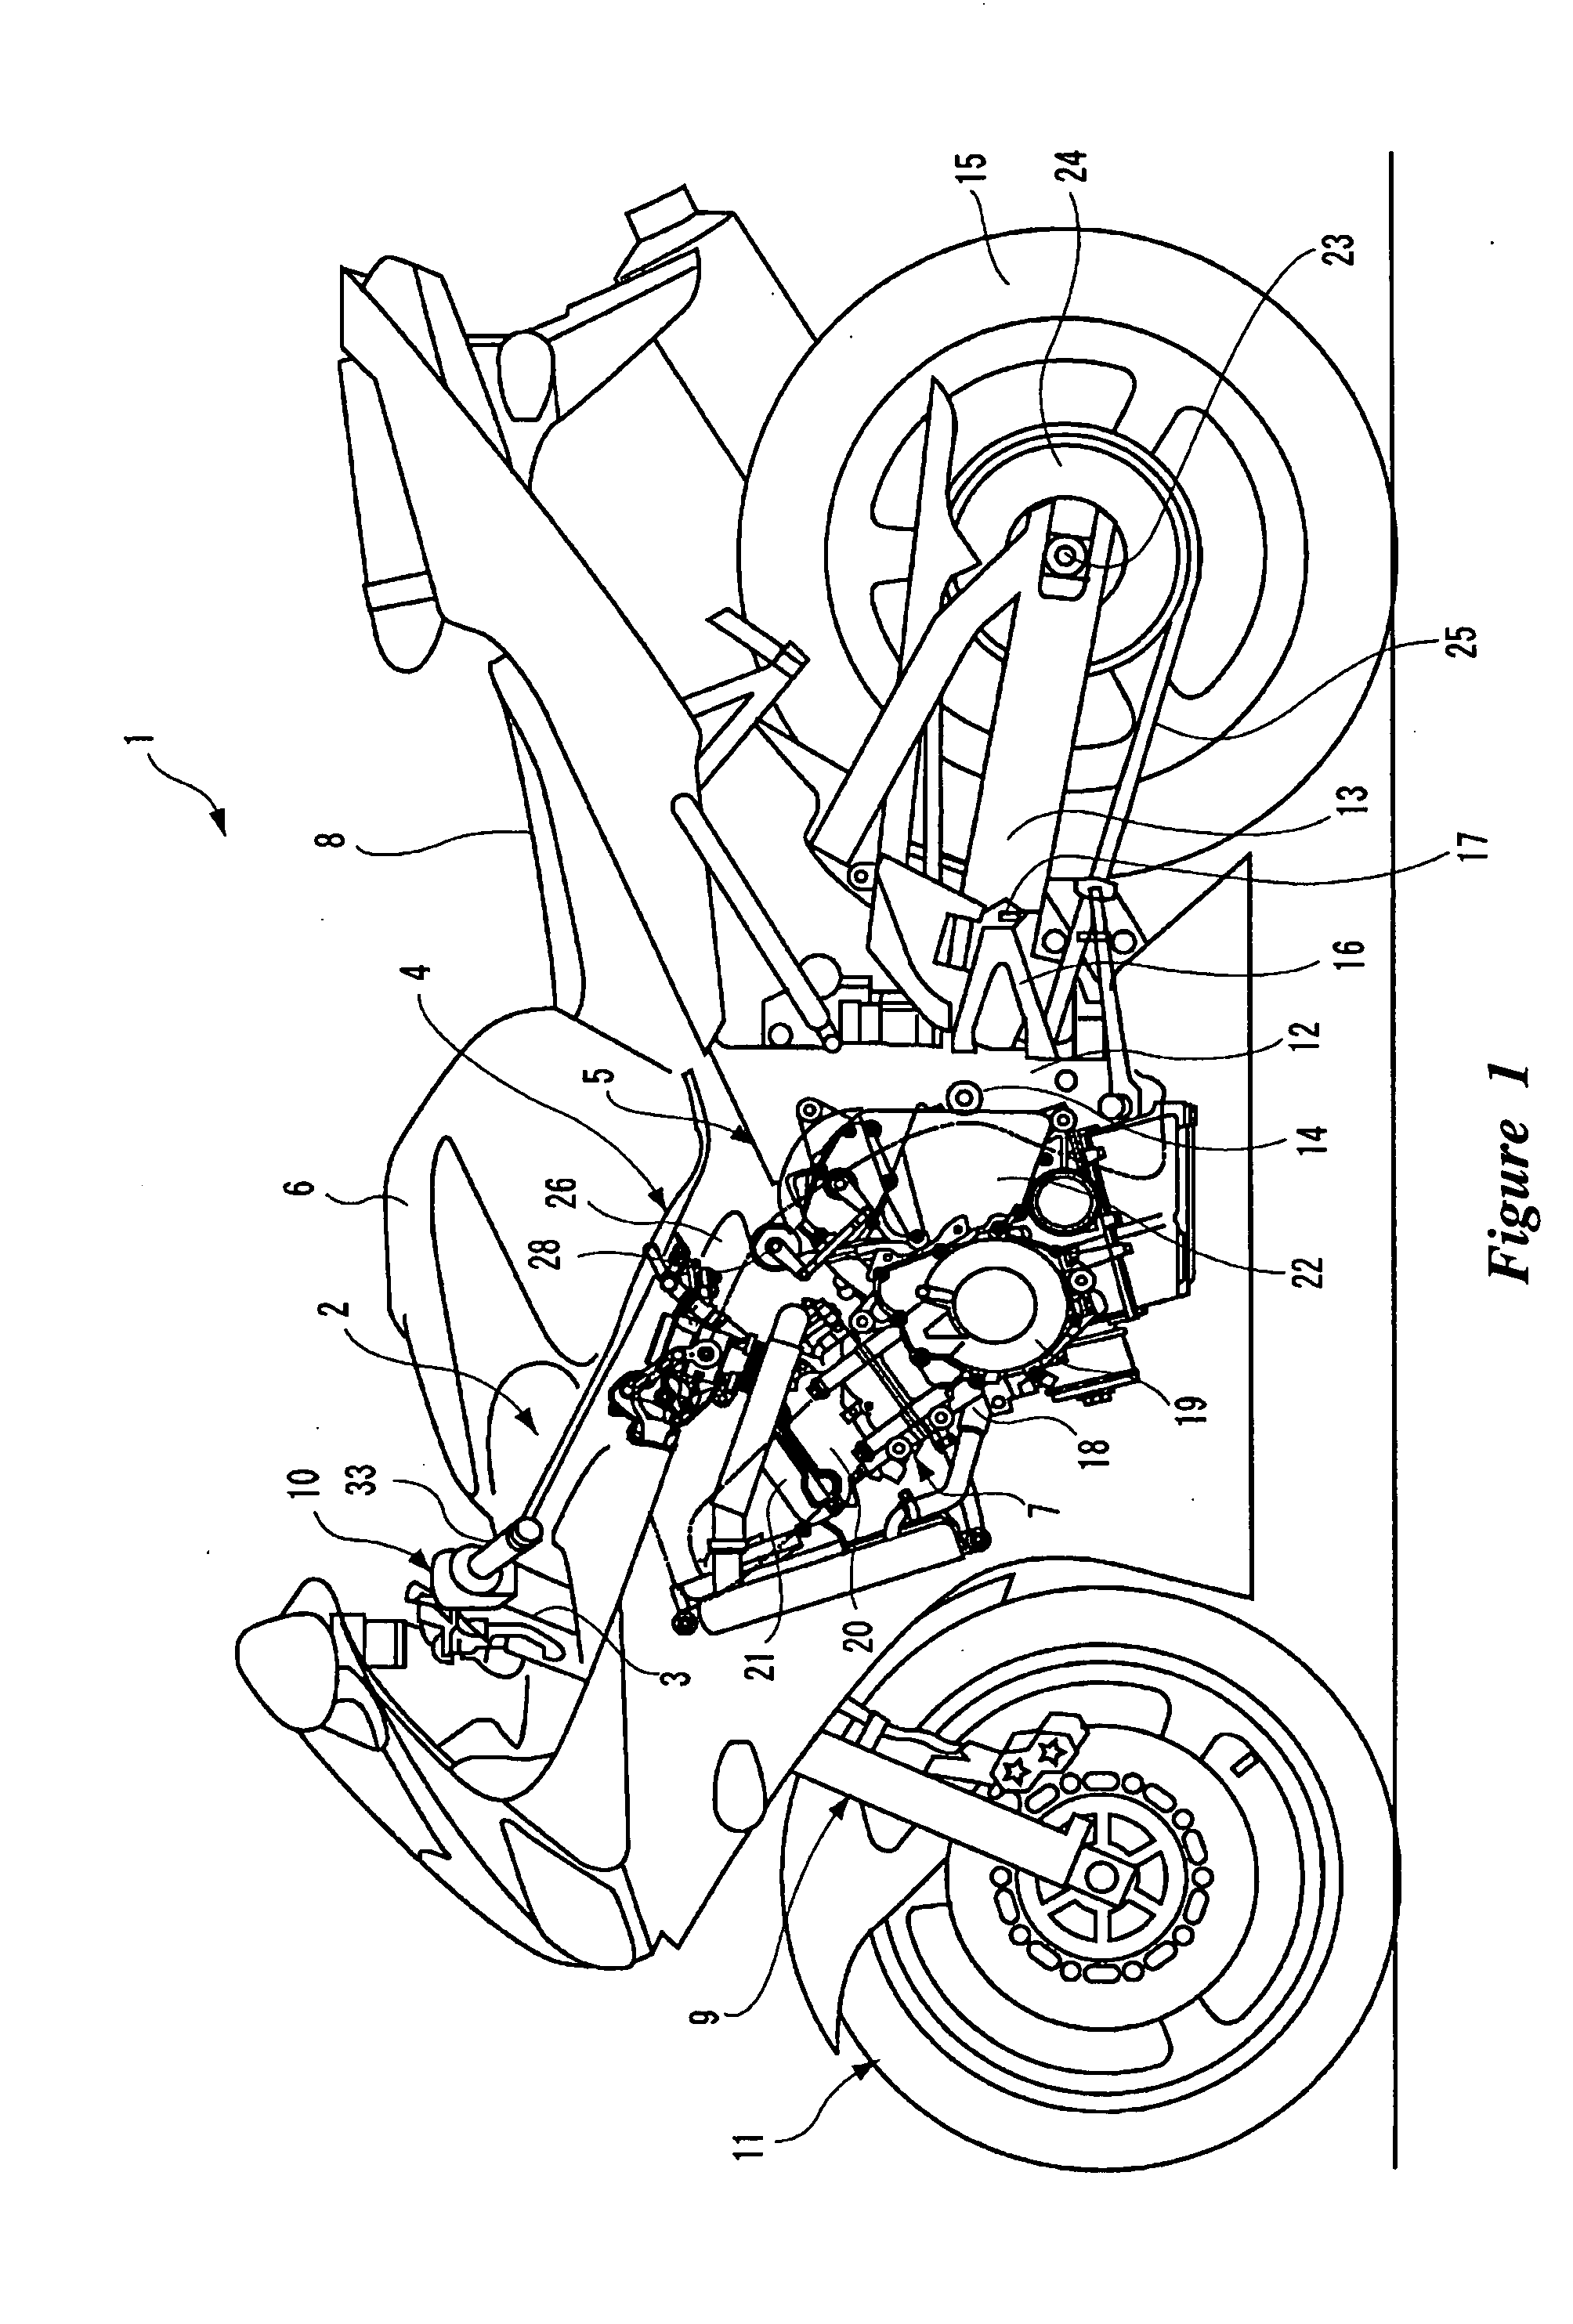 Abnormality monitoring device for motor control system